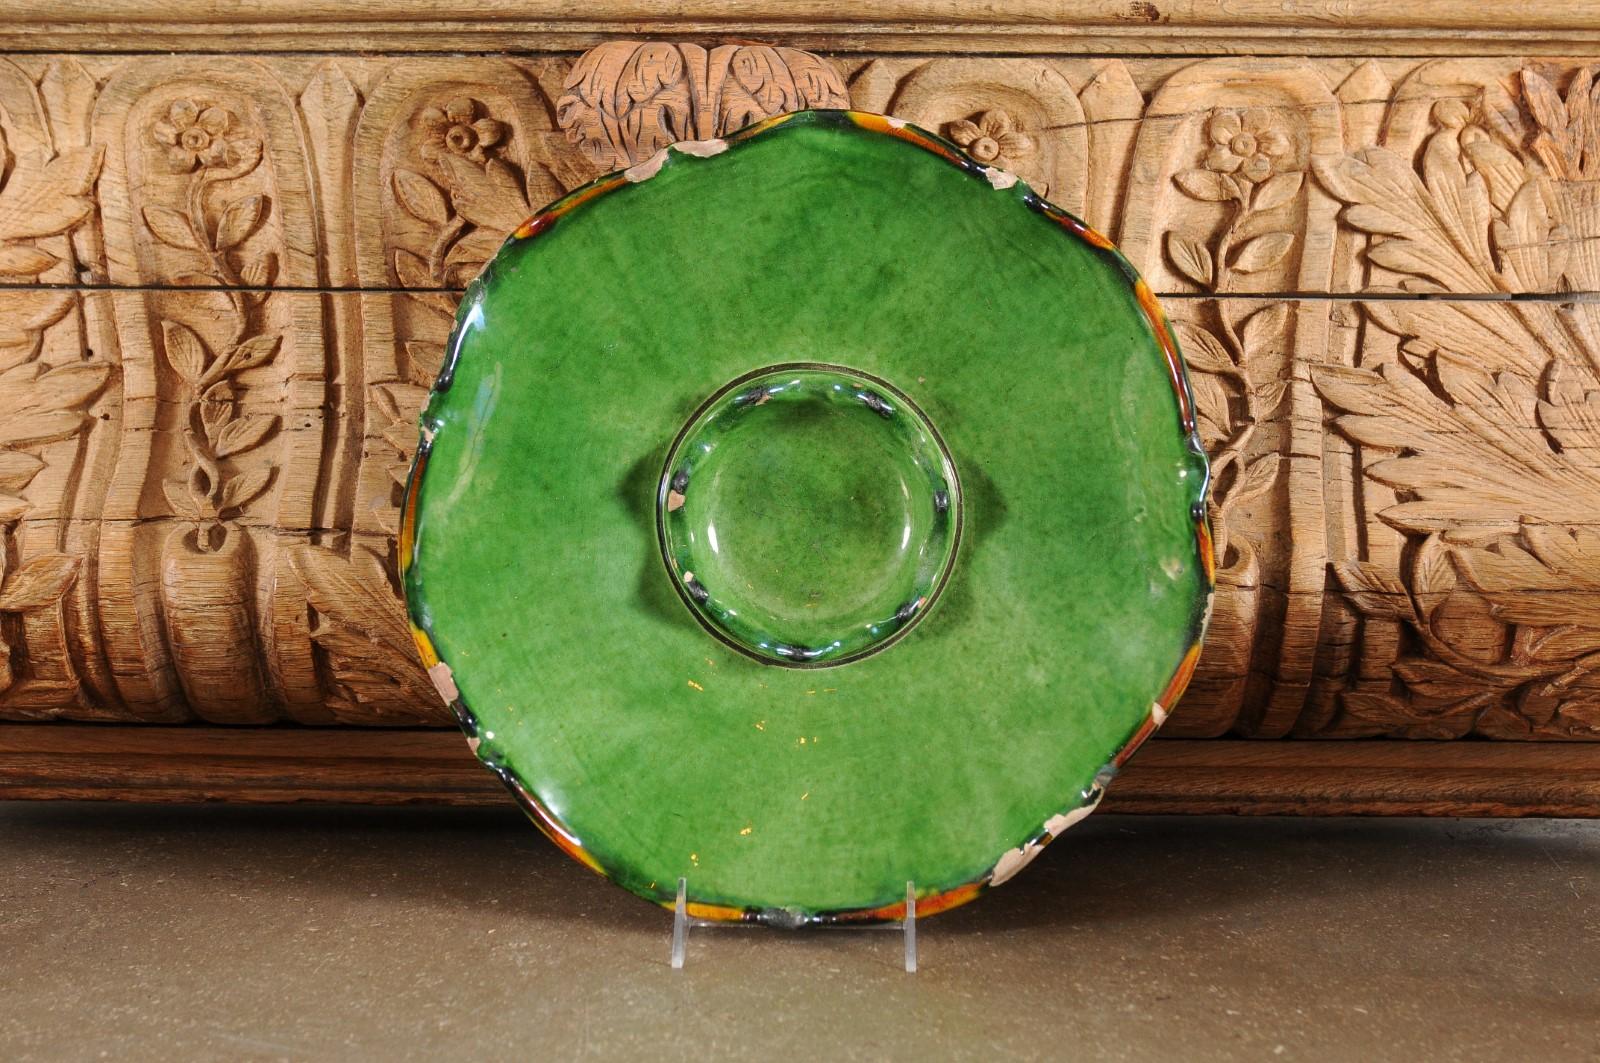 French Provincial 1850s Green Glazed Hors d'Œuvres Dish with Scalloped Edges For Sale 3